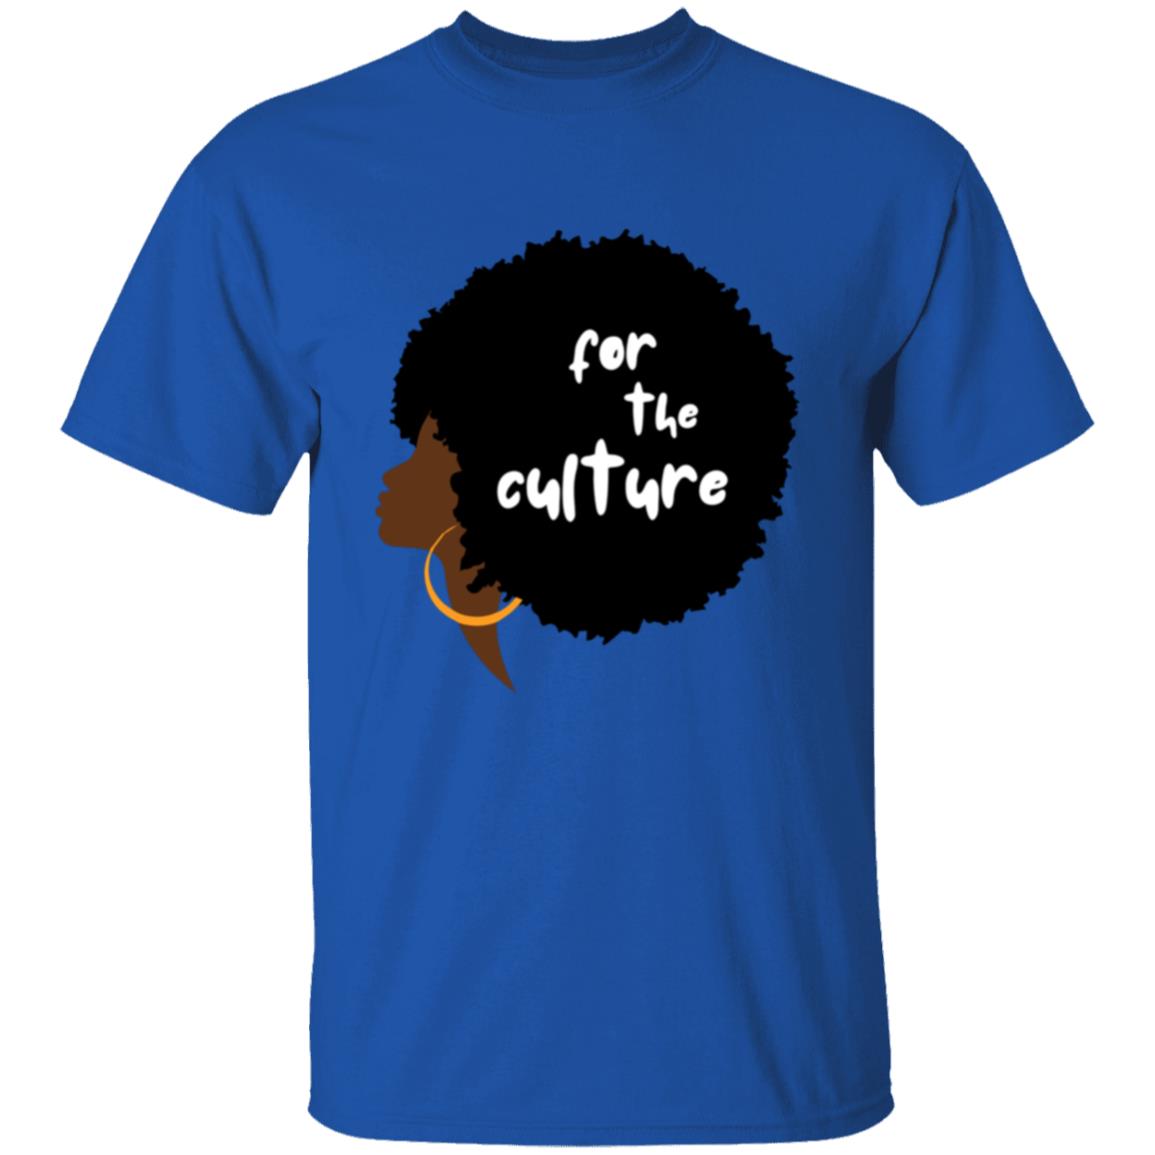 for the culture (UNISEX) T-Shirt